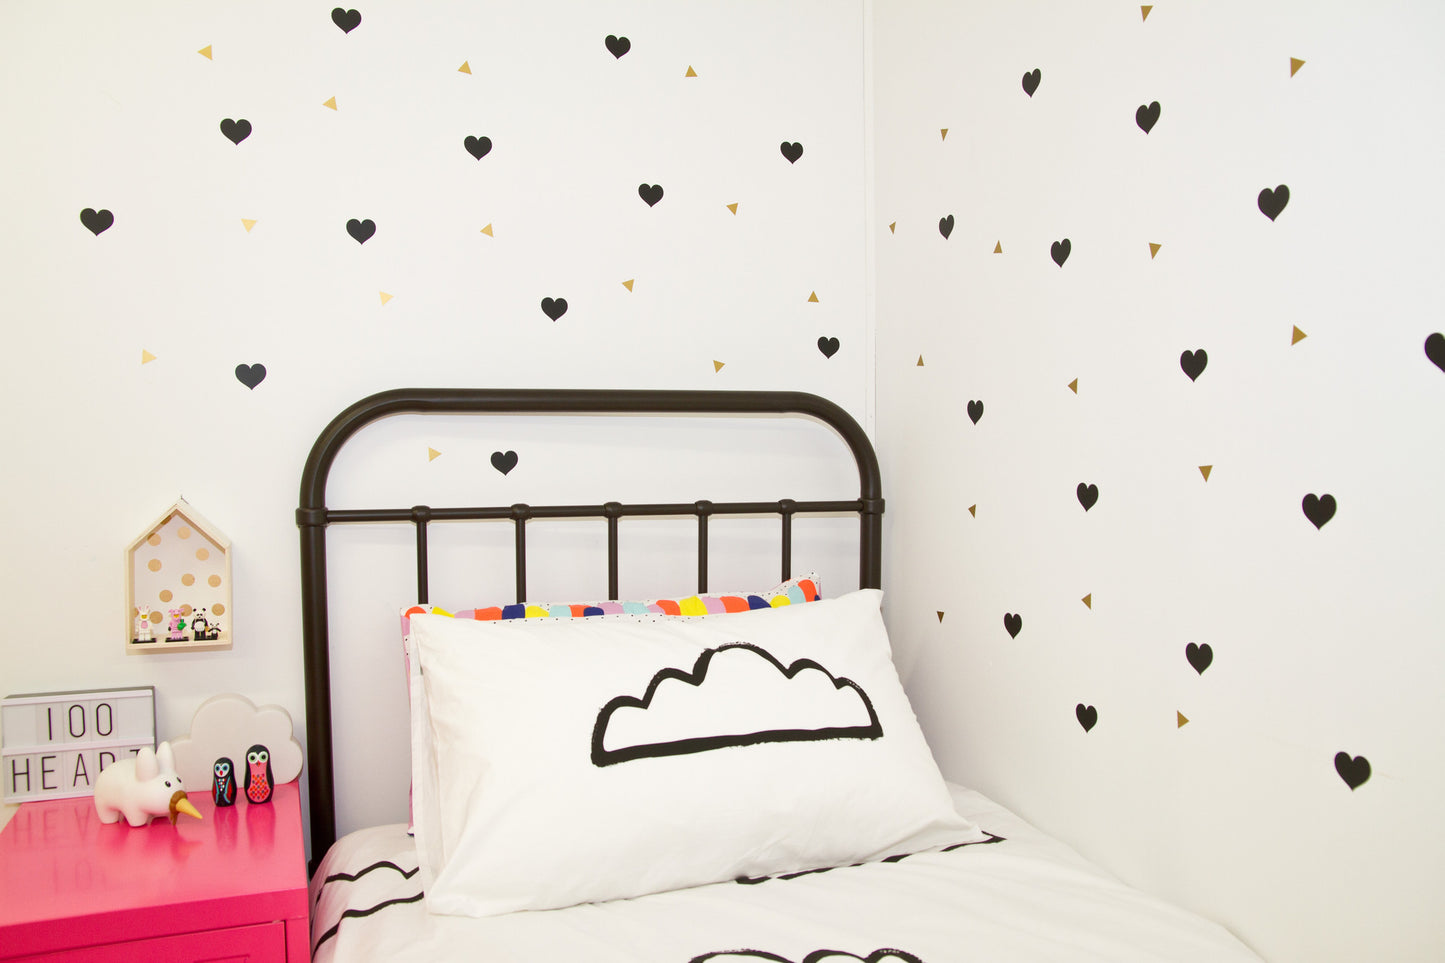 Mix n Match Wall Decals - Mix up your colours - Small - Wall decals - 100 Percent Heart 